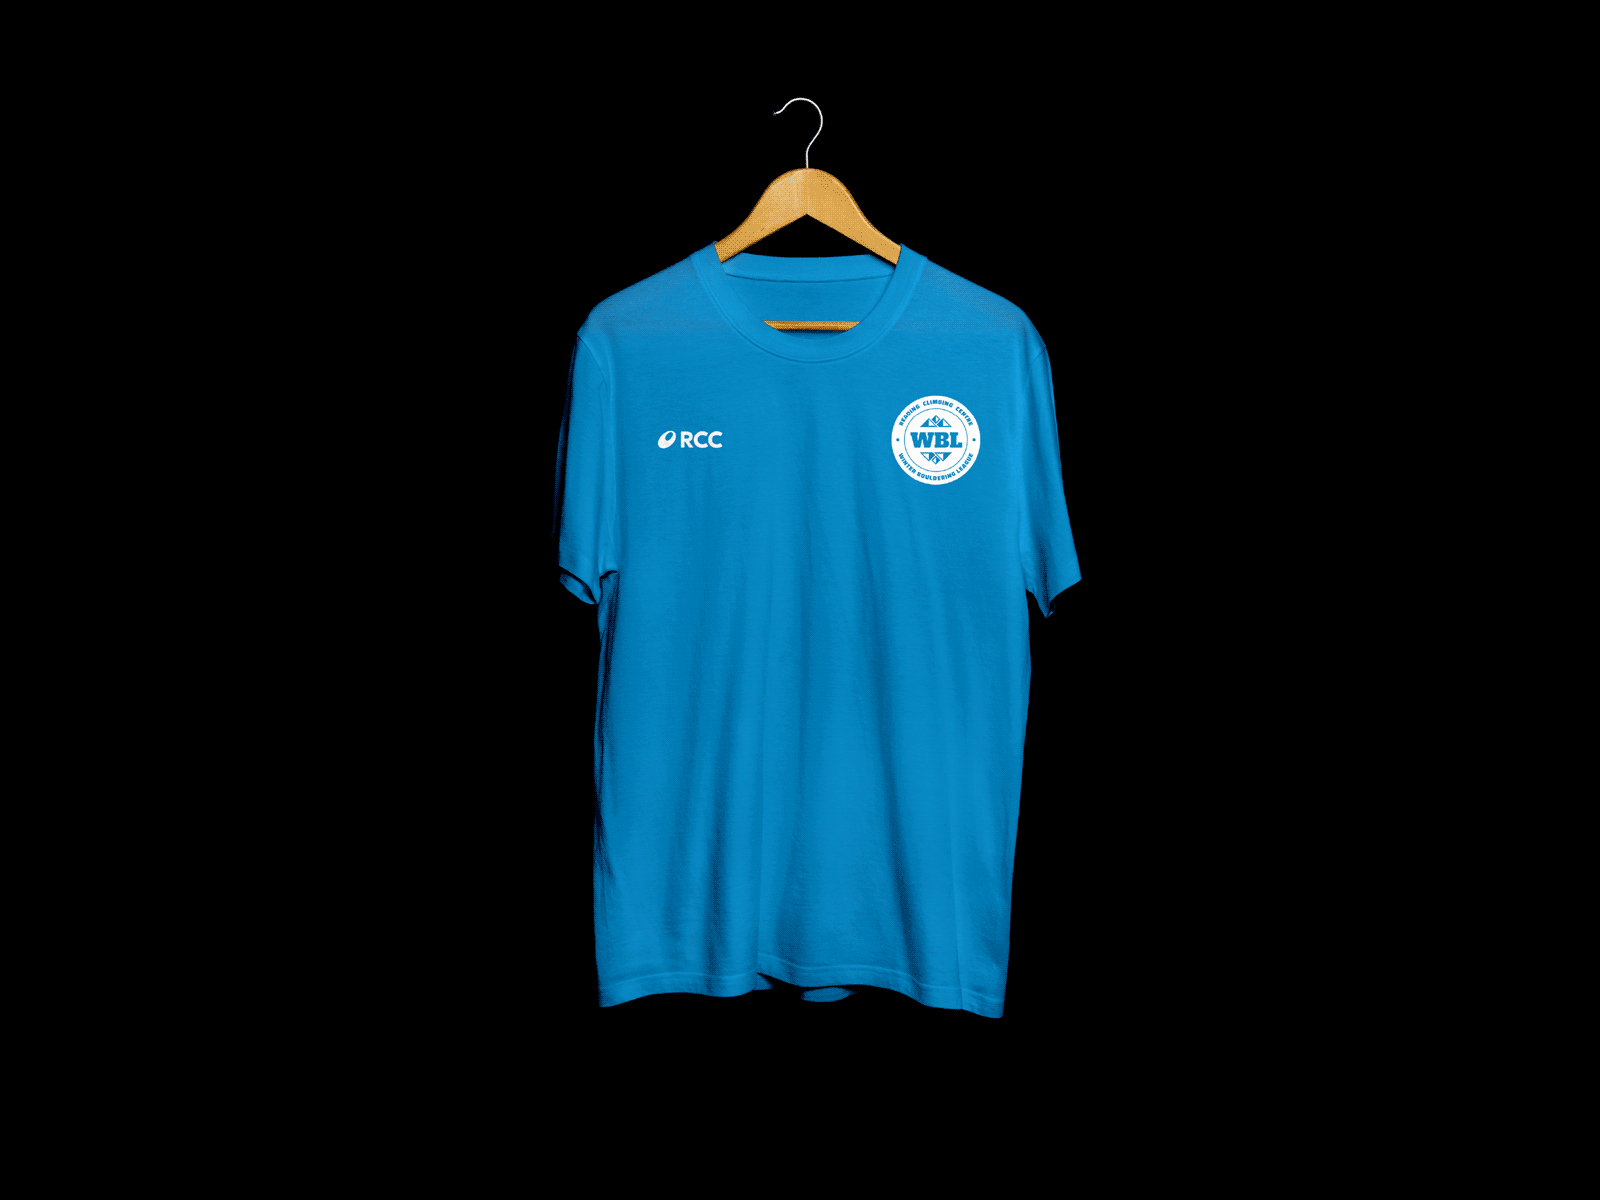 Winter Bouldering League climbing competition tshirt